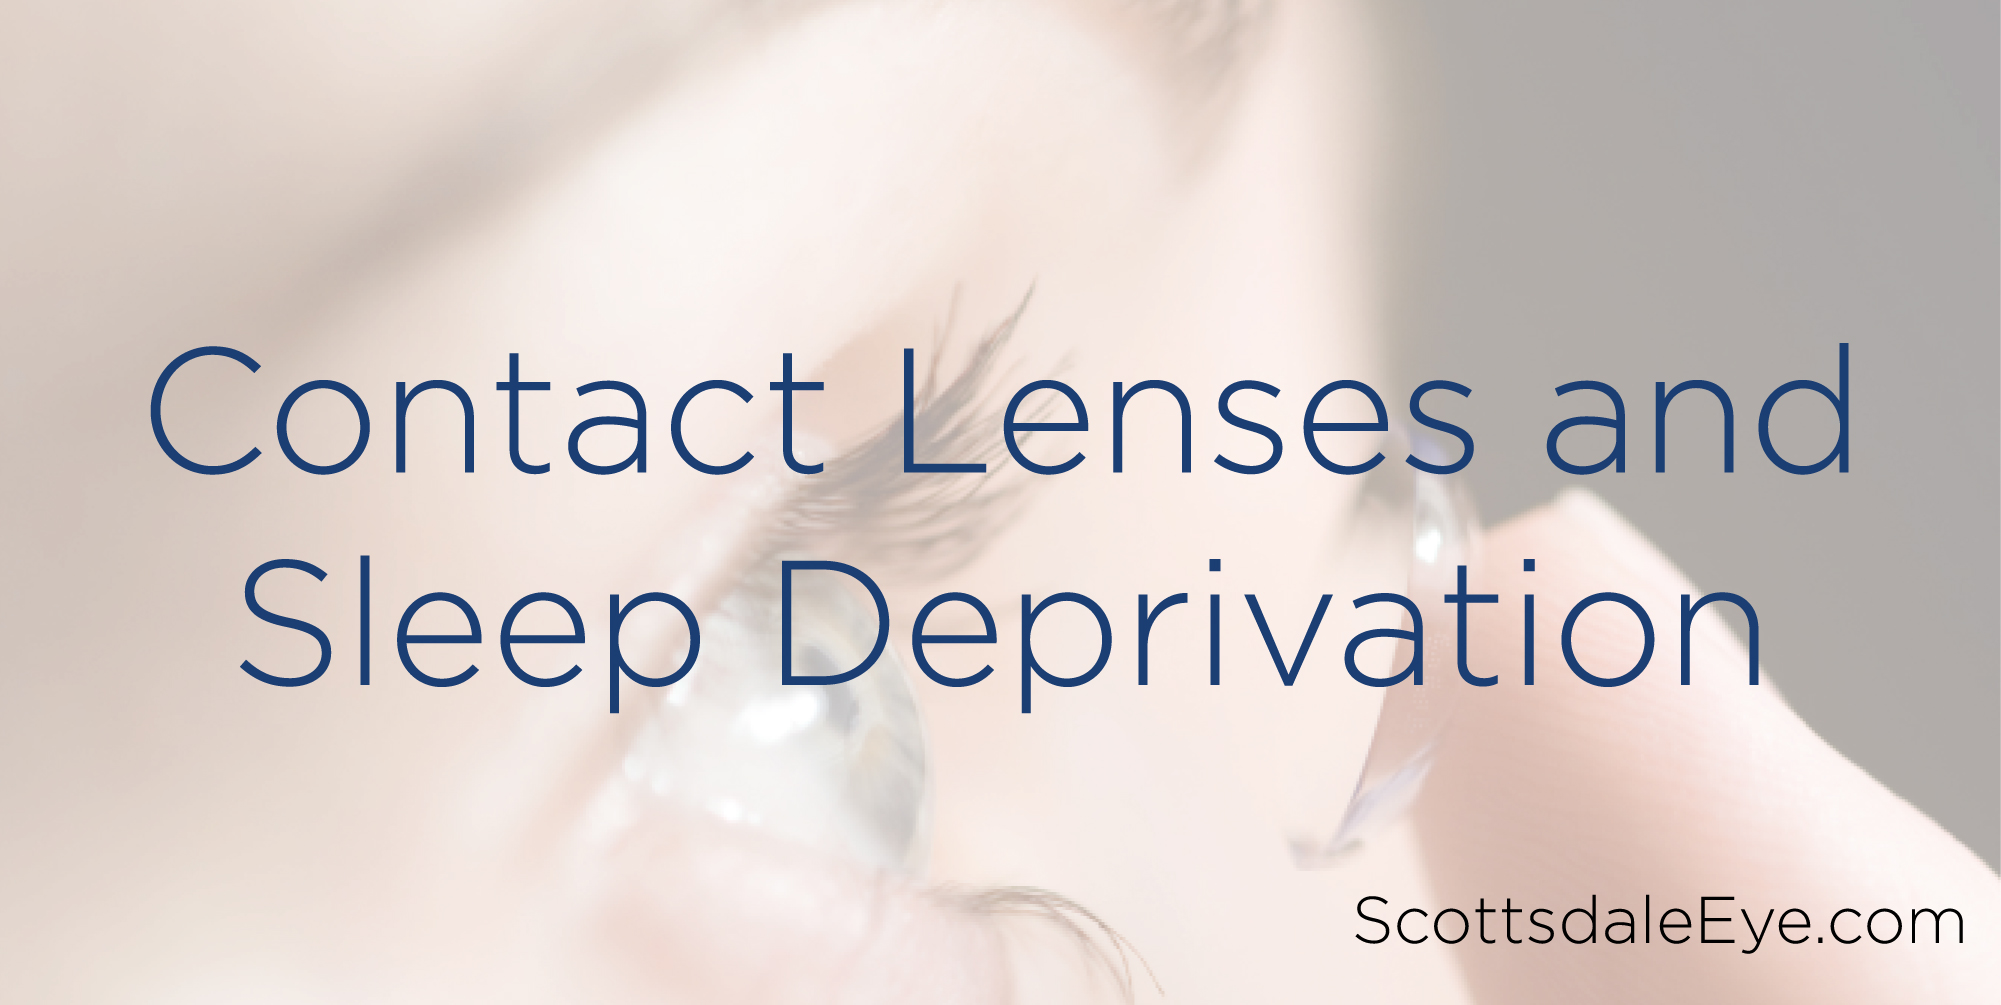 Contact Lenses and Sleep Deprivation